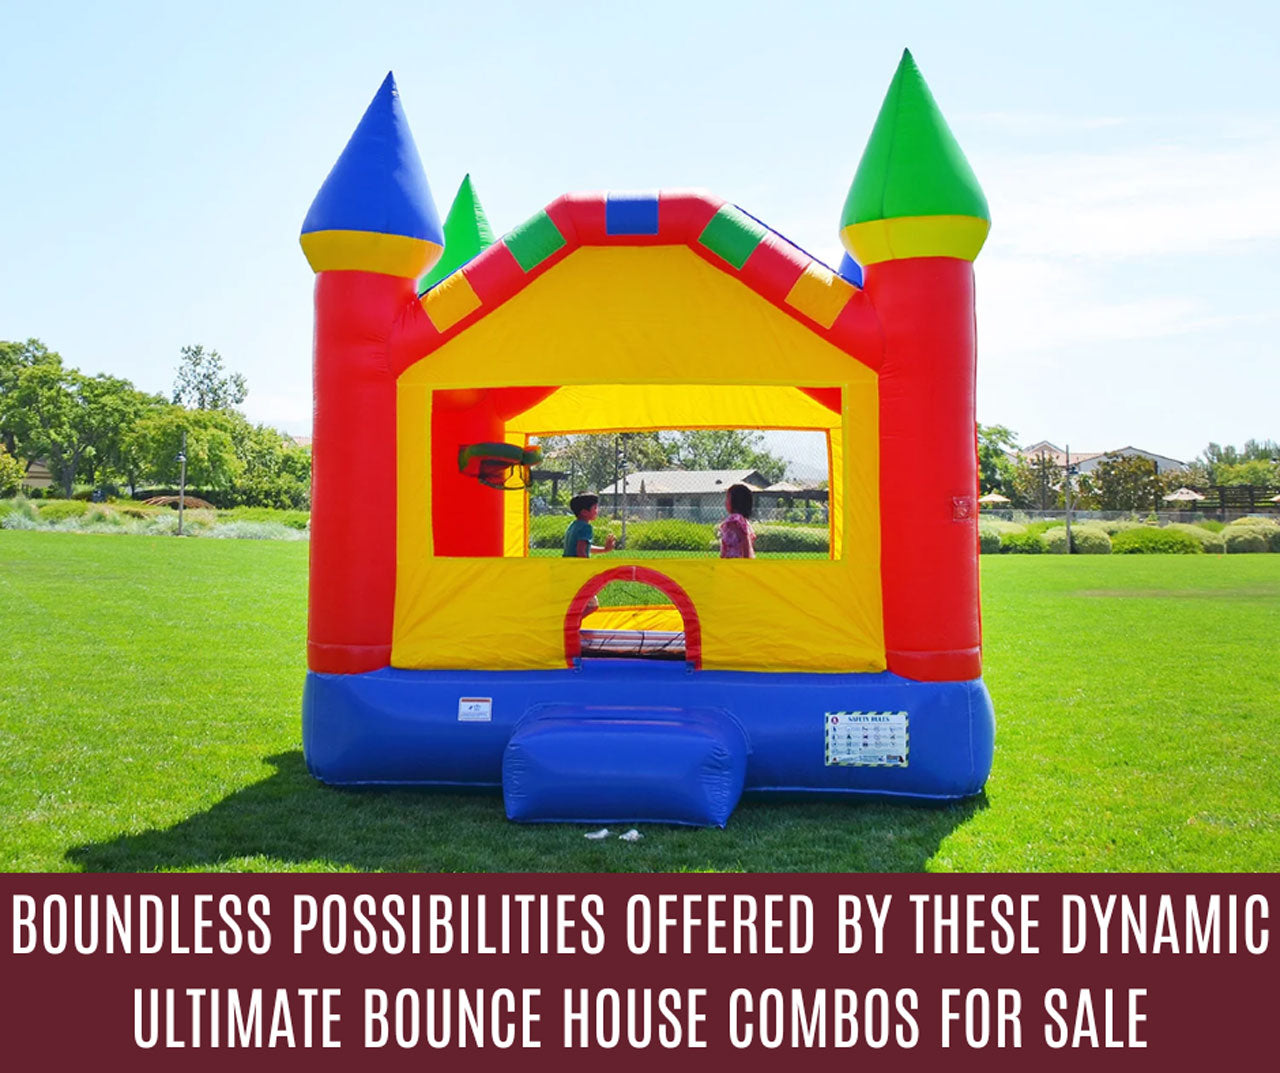 Boundless Possibilities Offered By These Dynamic Ultimate Bounce House Combos for Sale